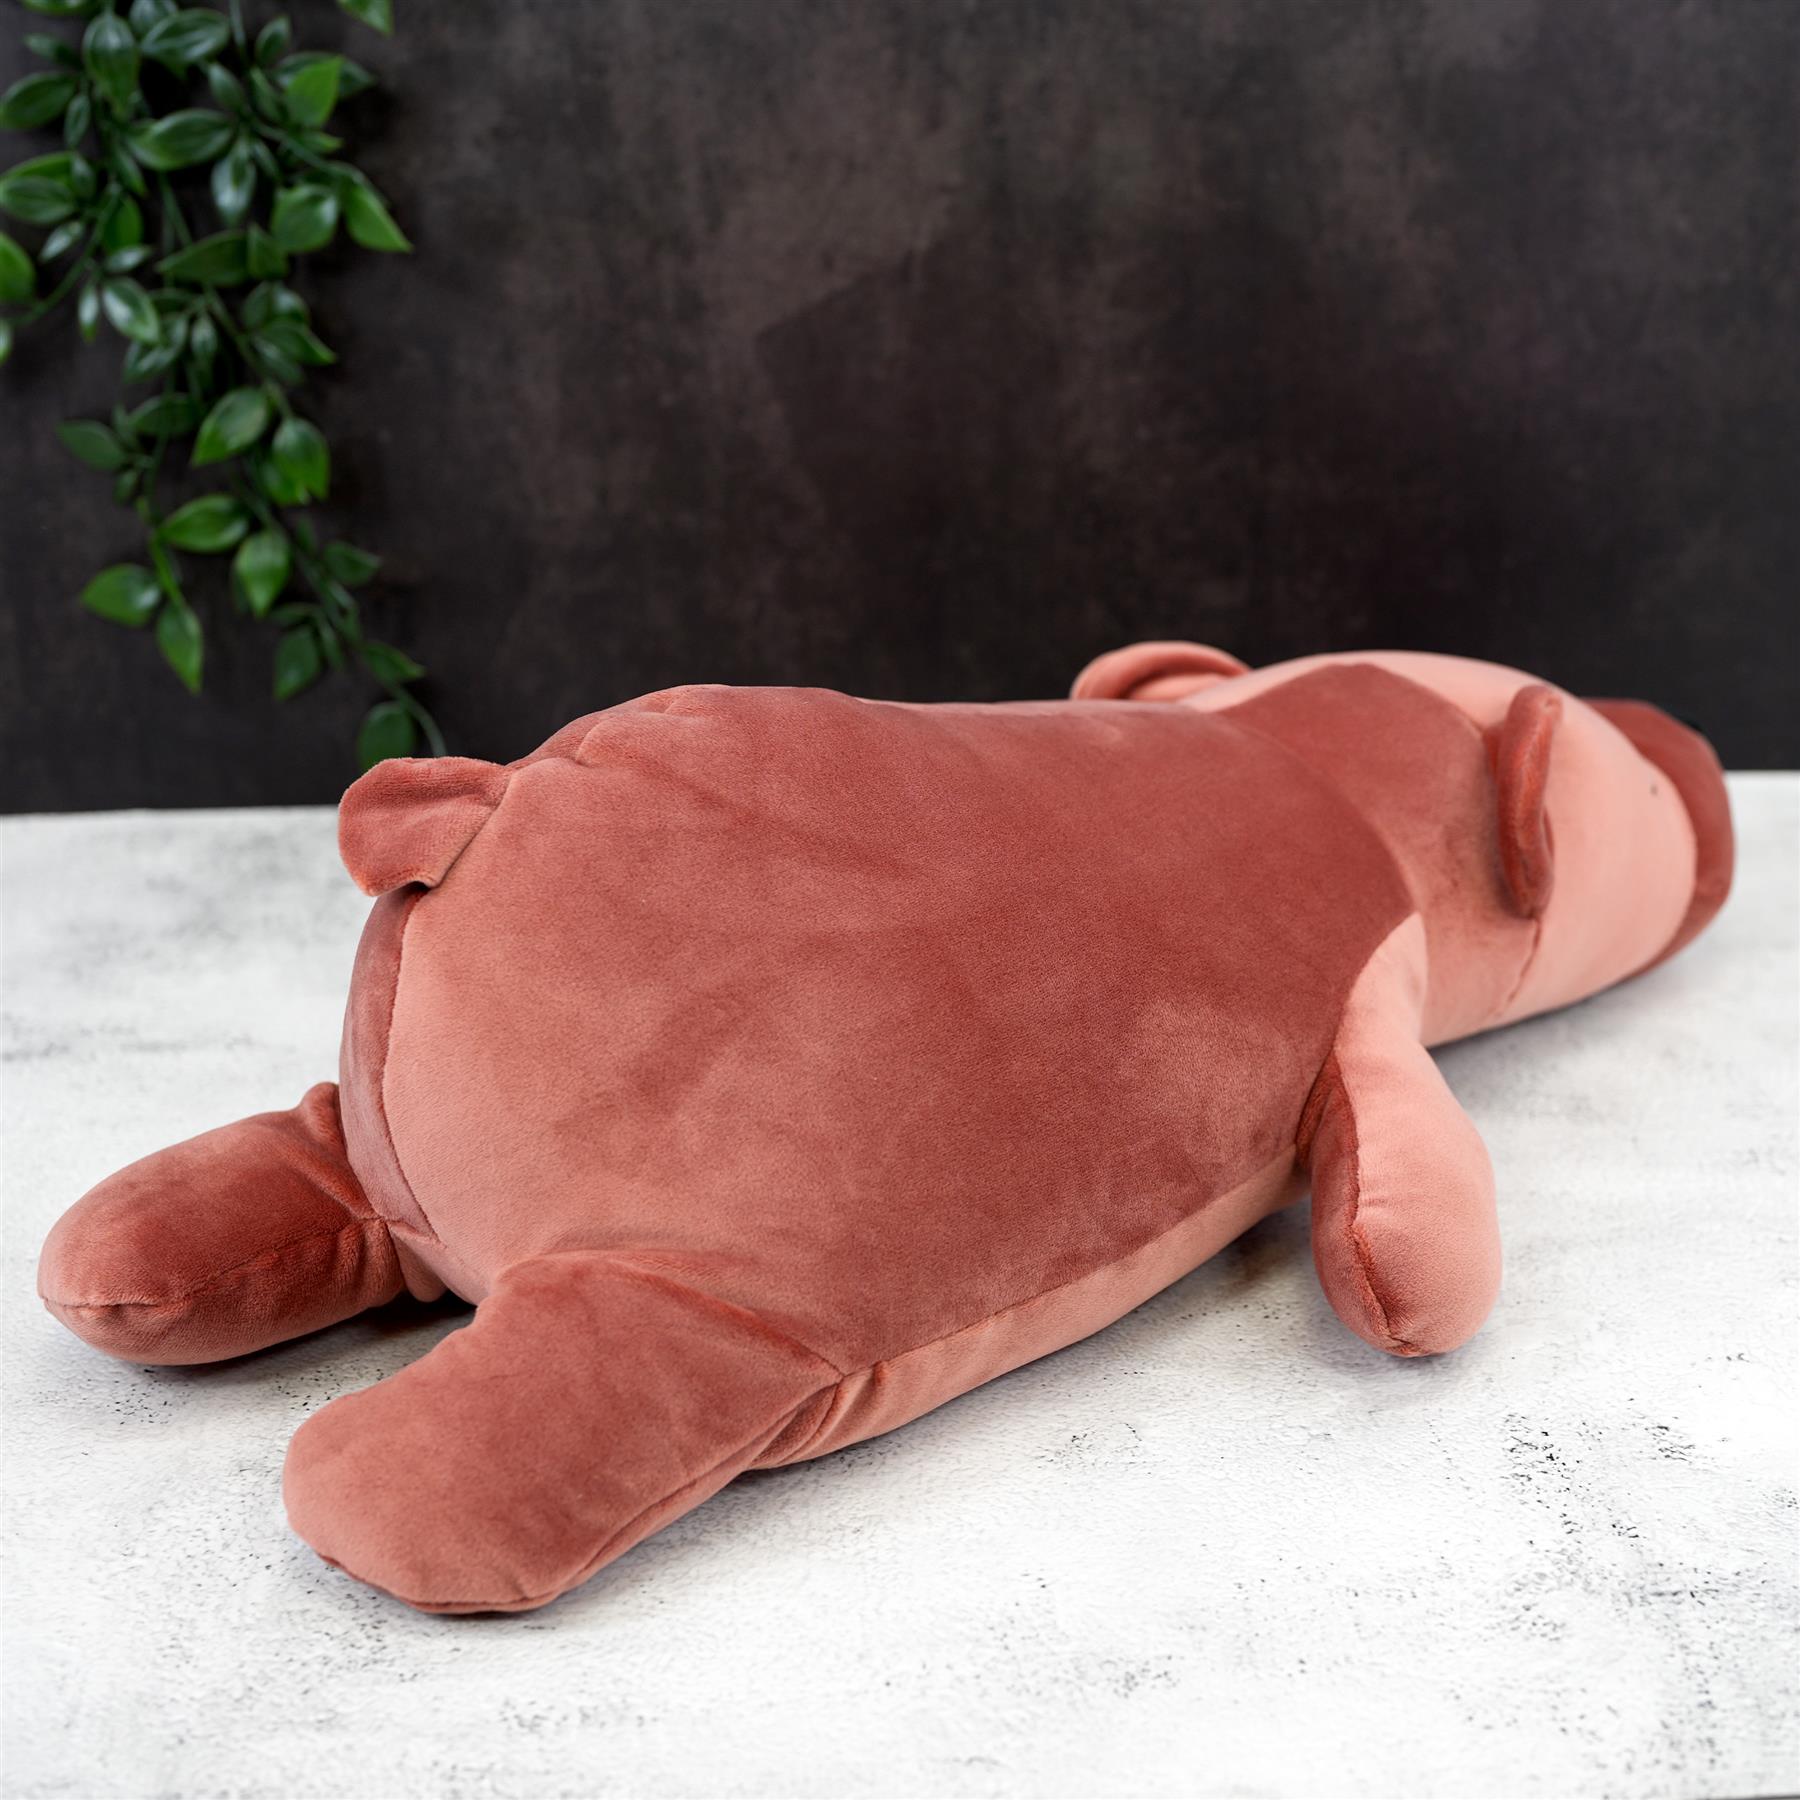 20” Super-Soft Bear Plush Pillow Toy by The Magic Toy Shop - The Magic Toy Shop